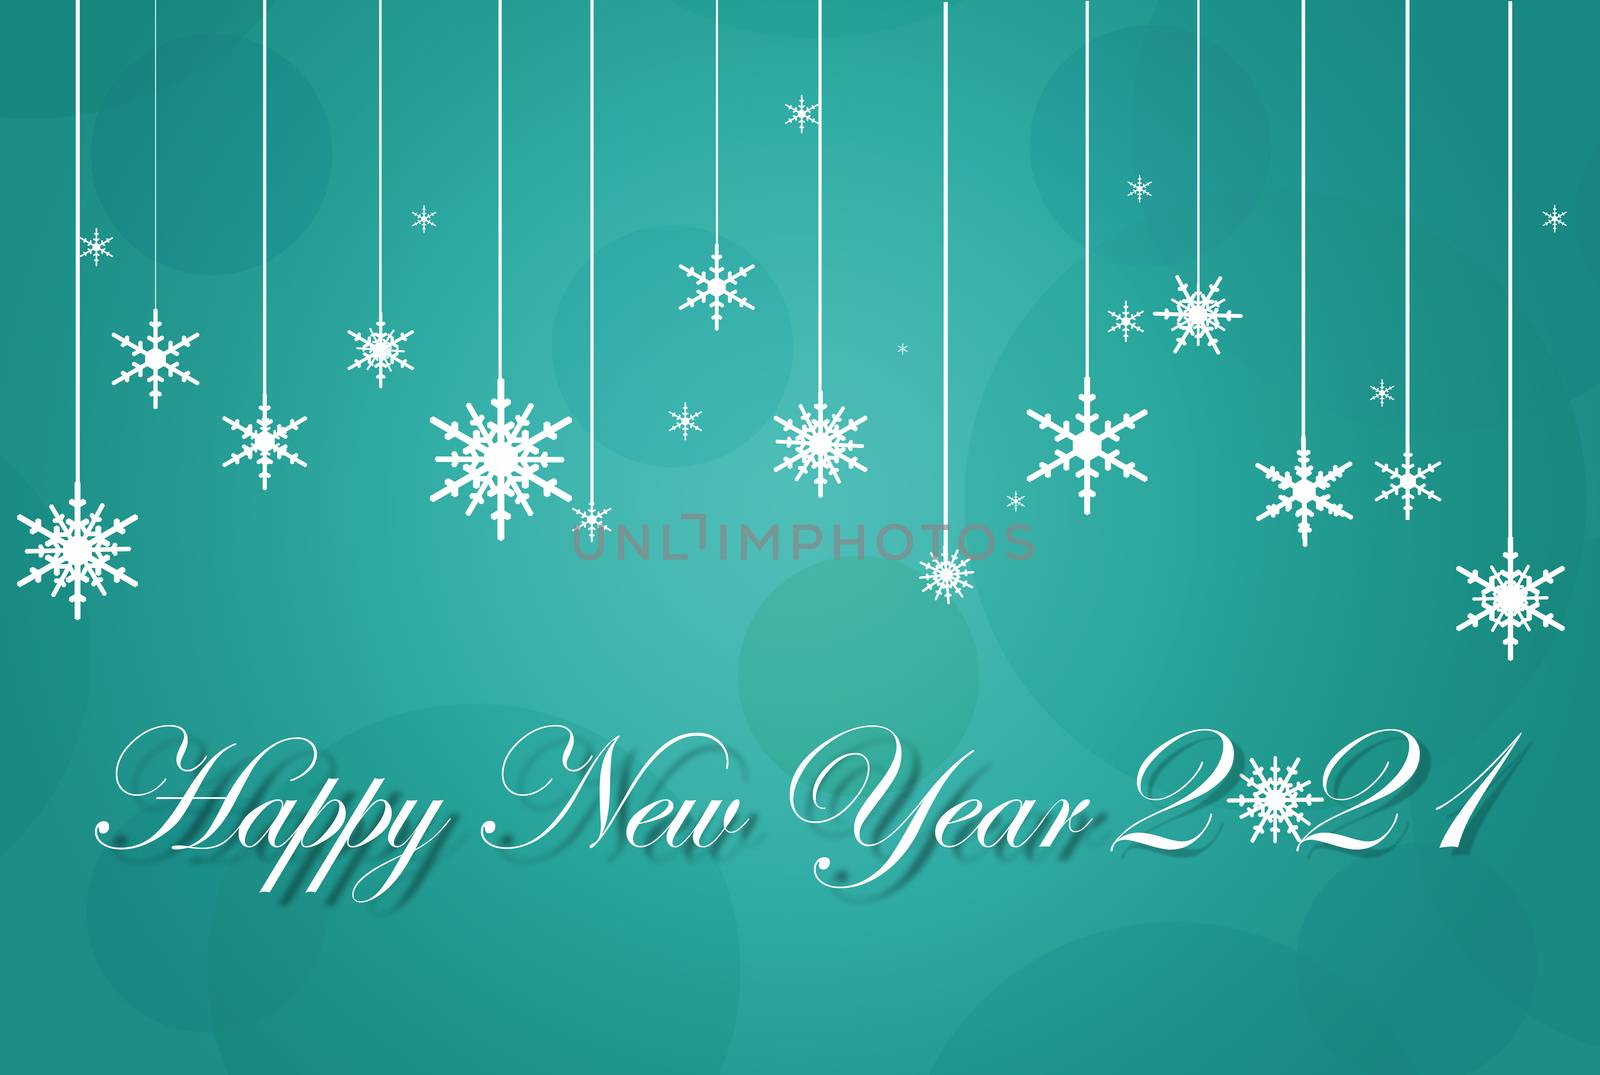 Happy New Year 2021 in turquoise blue card by NelliPolk